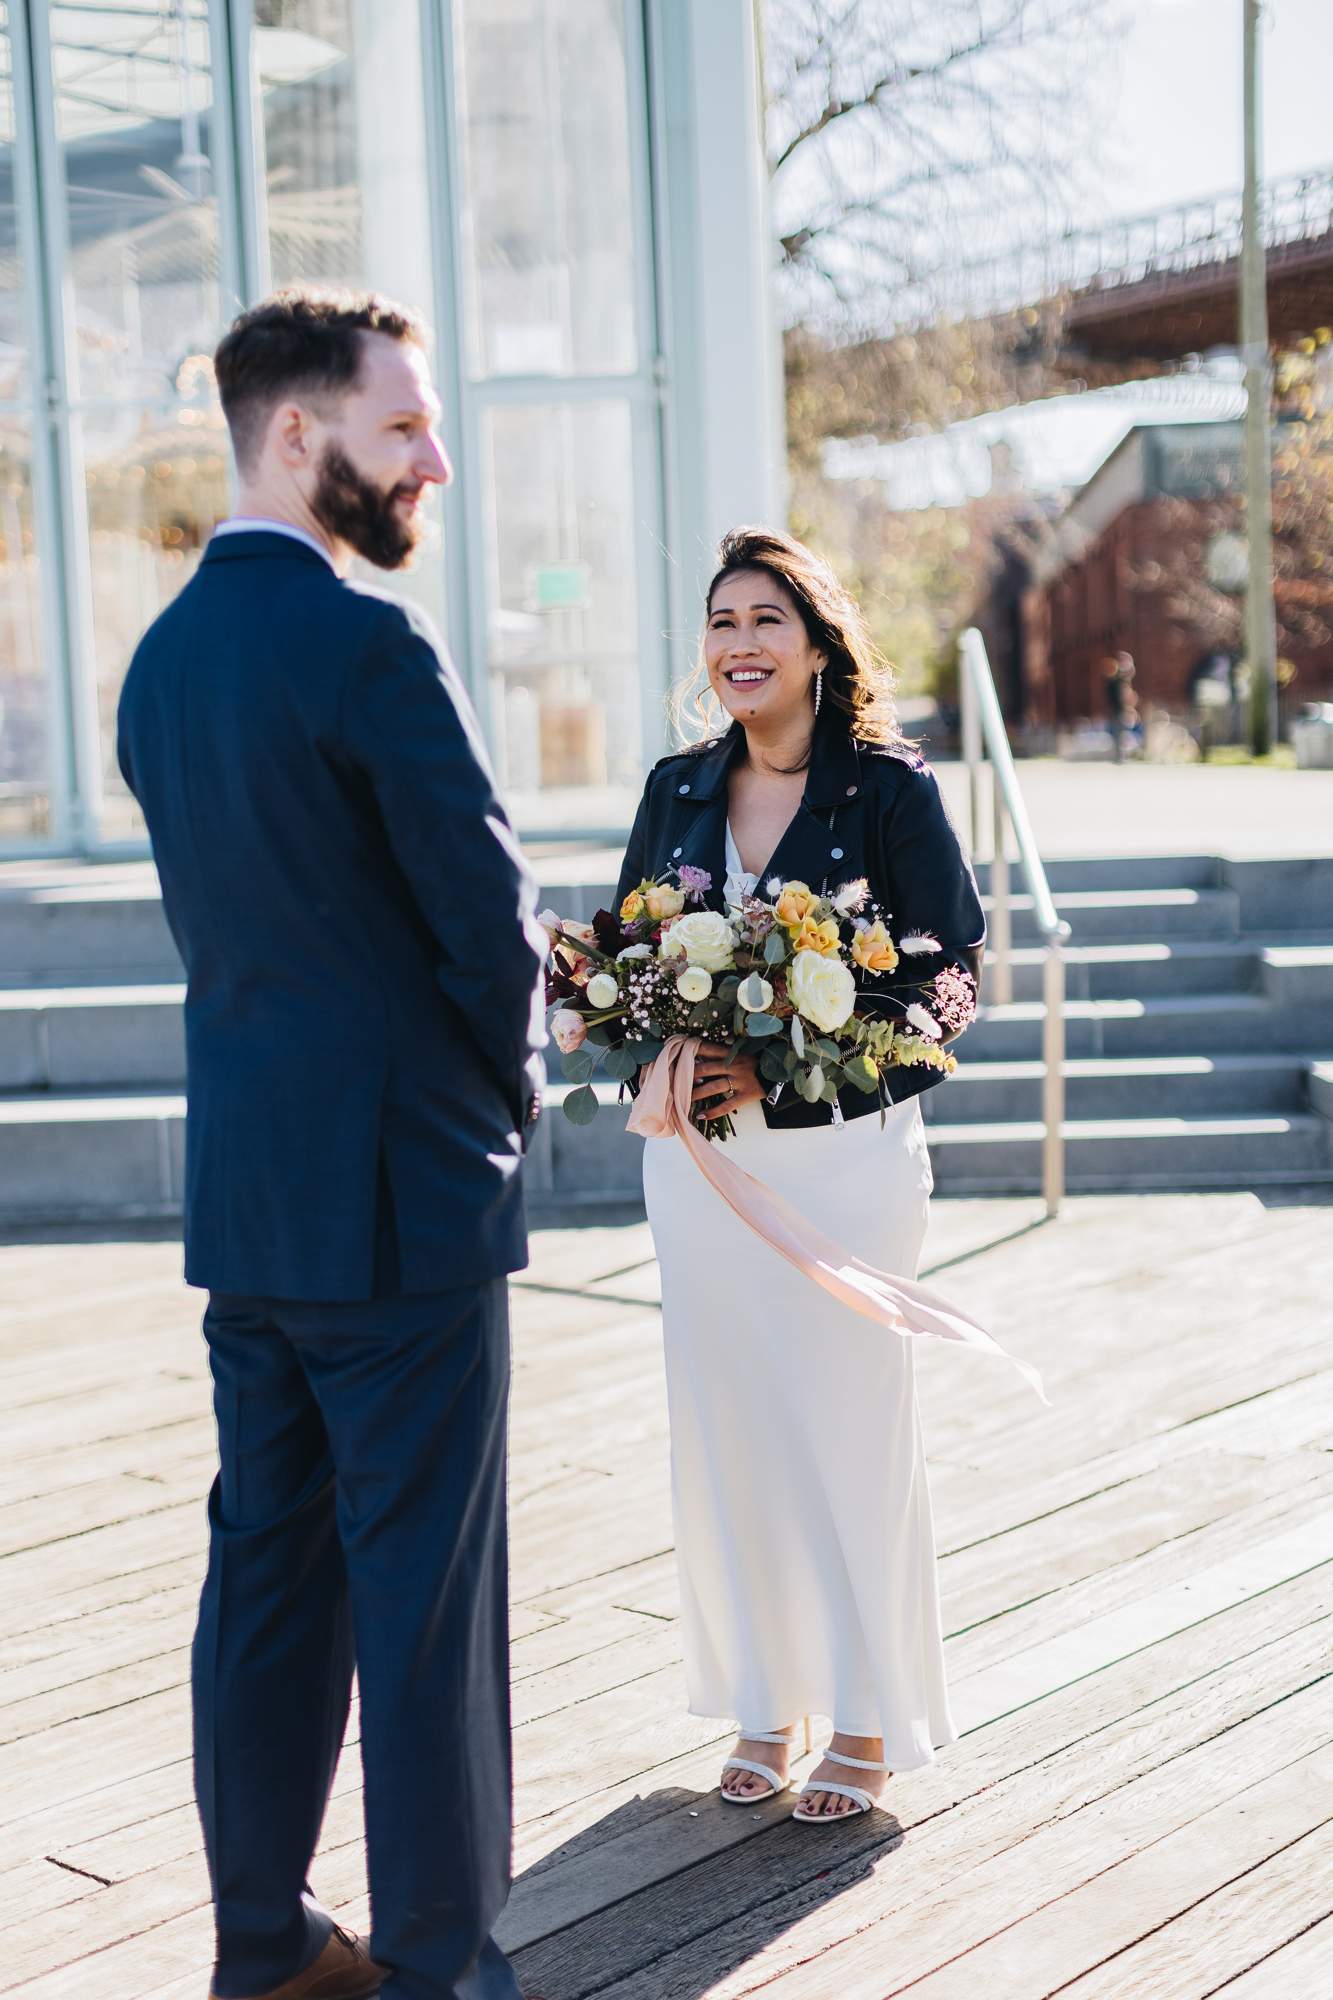 Candid Fall DUMBO Elopement with New York views and foliage